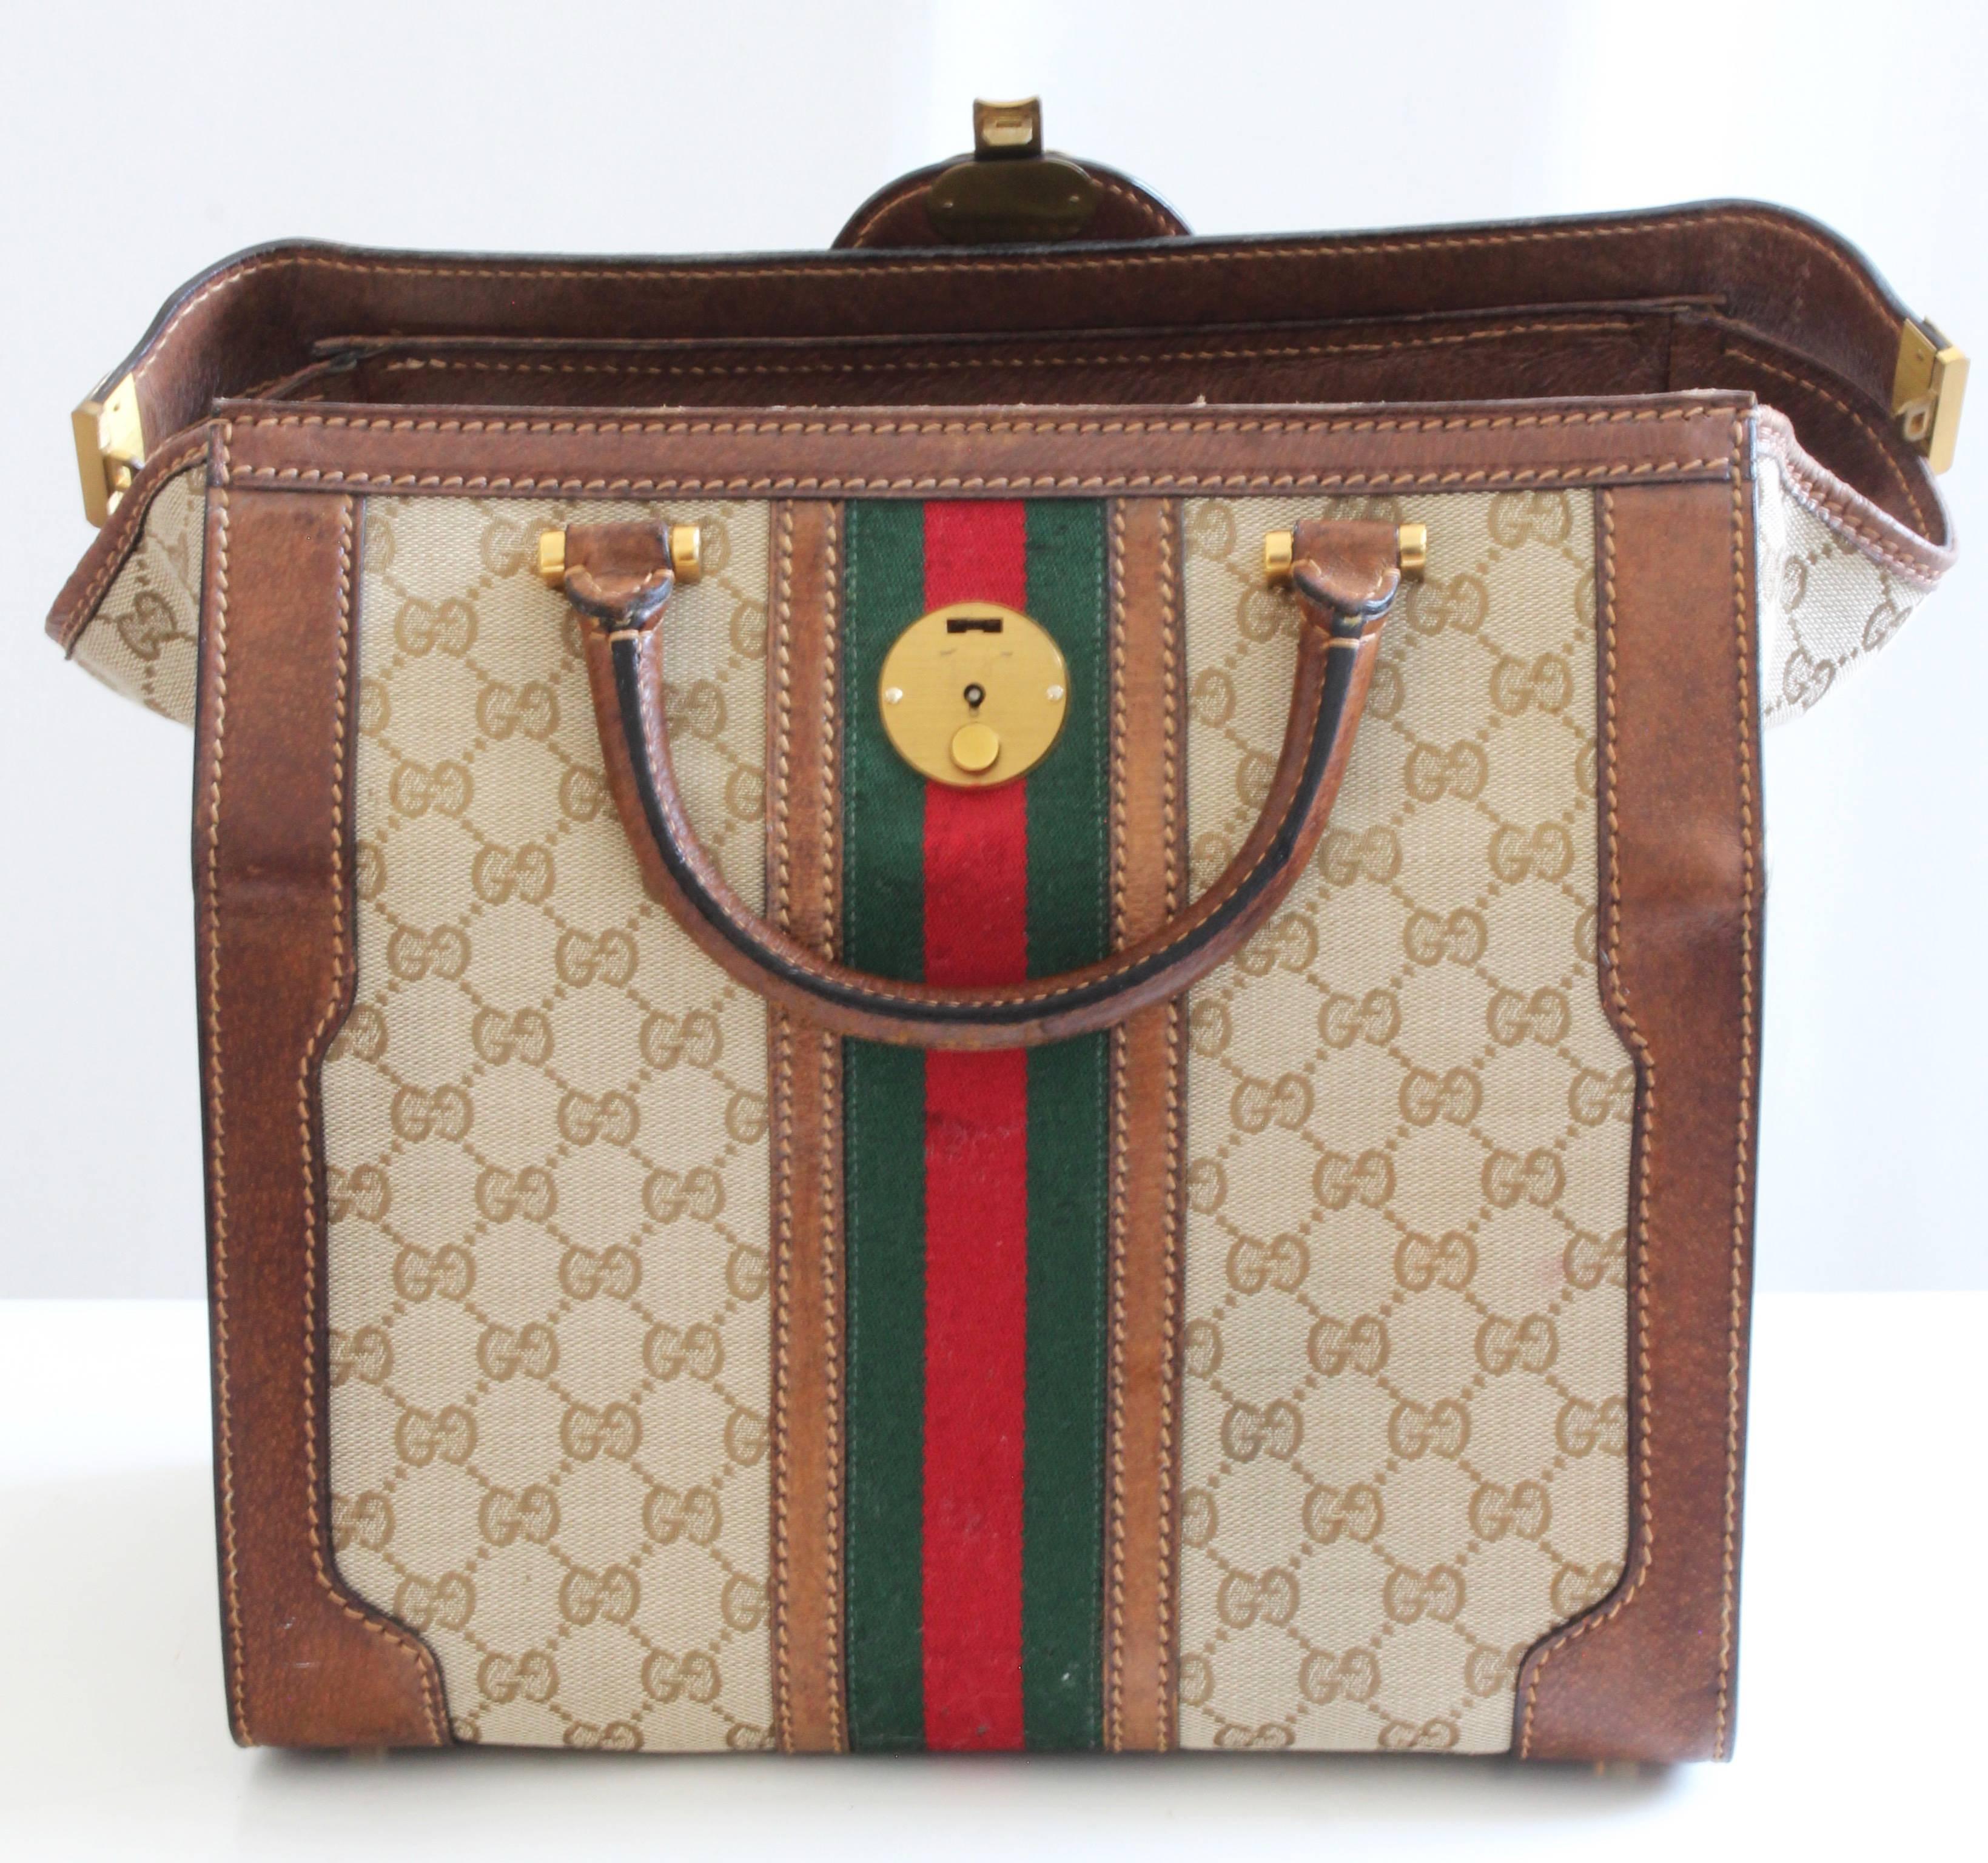 Gucci Logo Doctors Bag Train Case Vanity Webbing Travel Carry On Luggage, 1970s 1